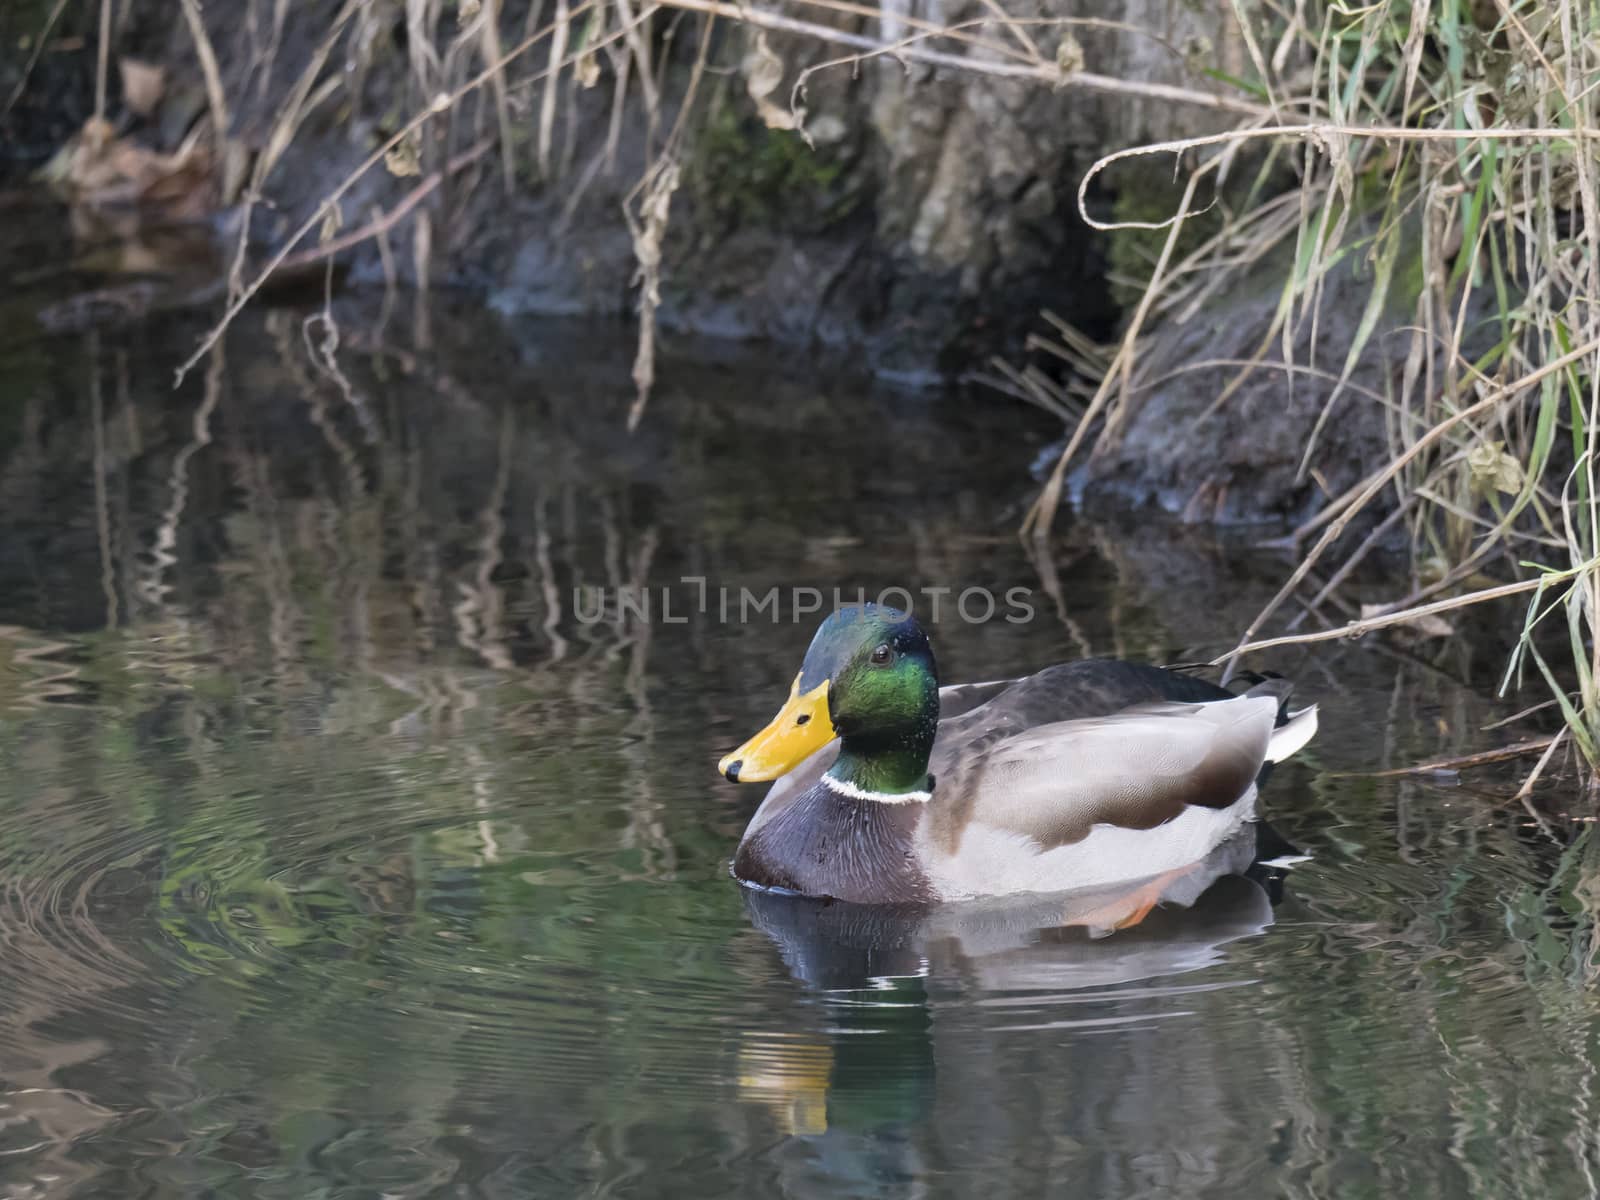 Close up mallard, Anas platyrhynchos, male duck swimming on water suface with grass, stone and dirt. Selective focus.